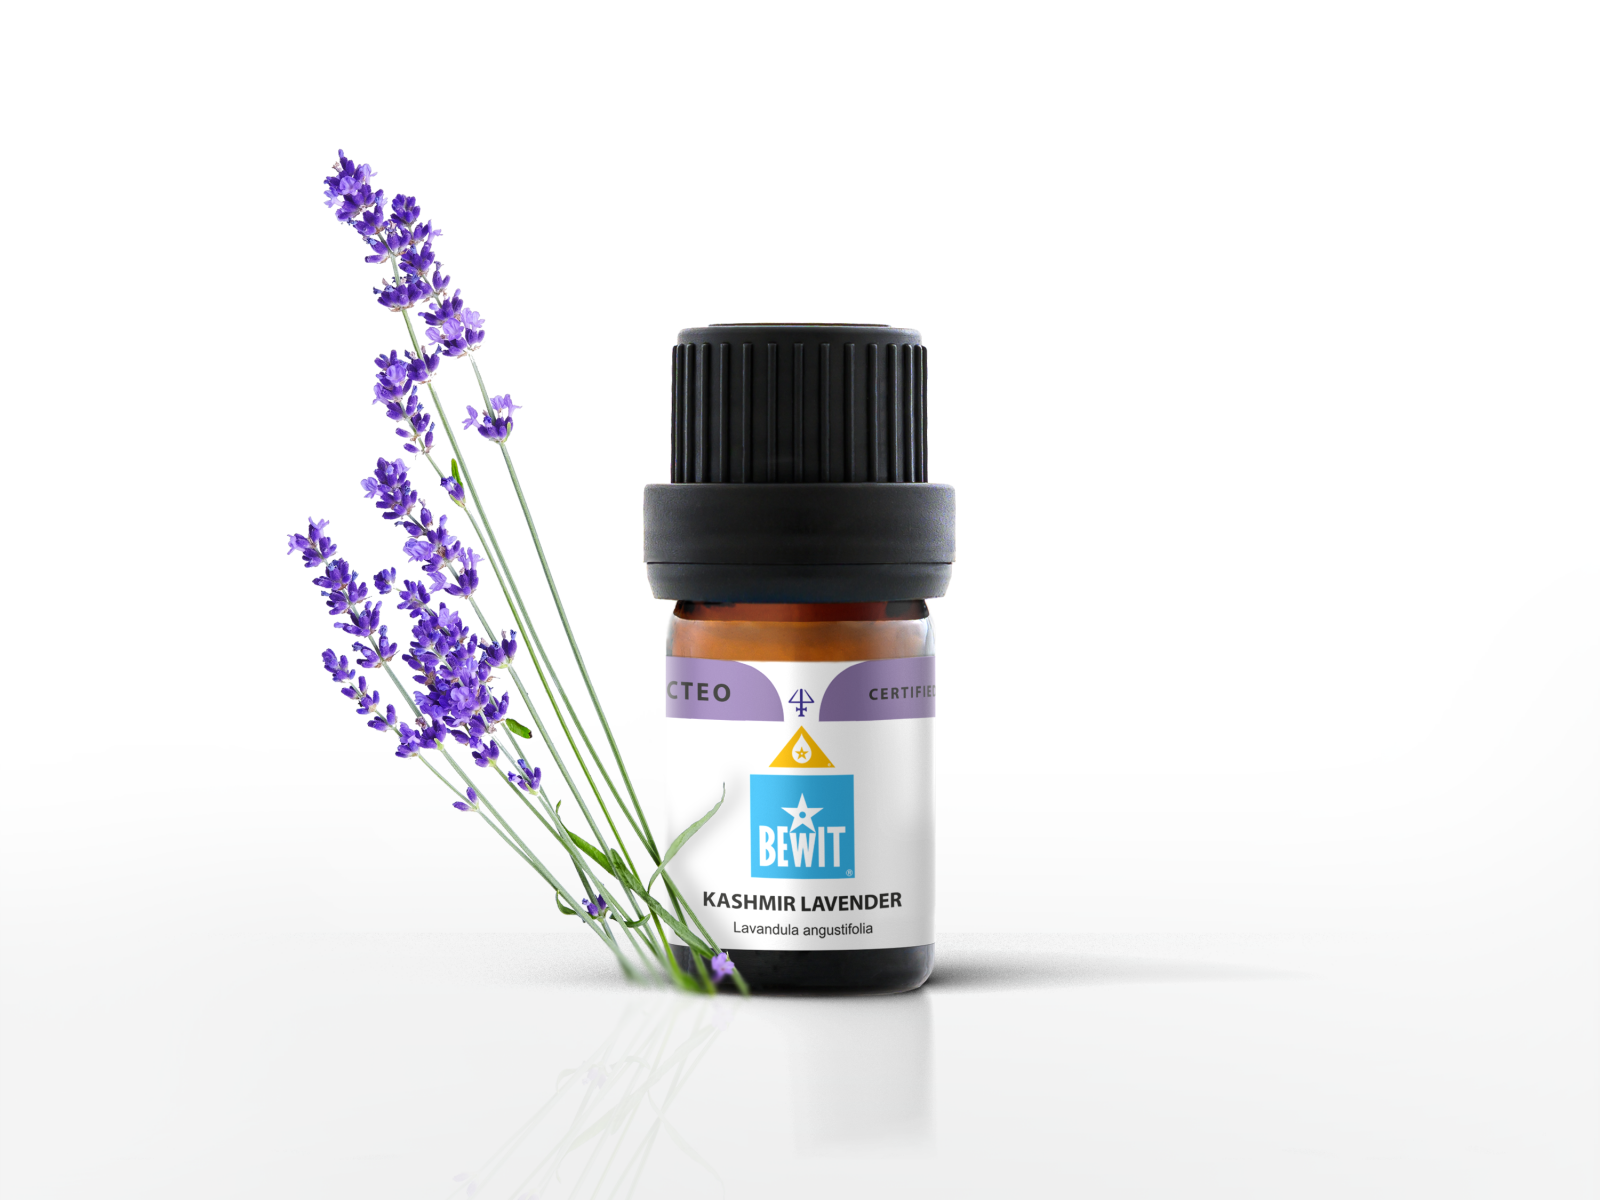 BEWIT Lavender Kashmir - 100% pure and natural CTEO® essential oil - 2